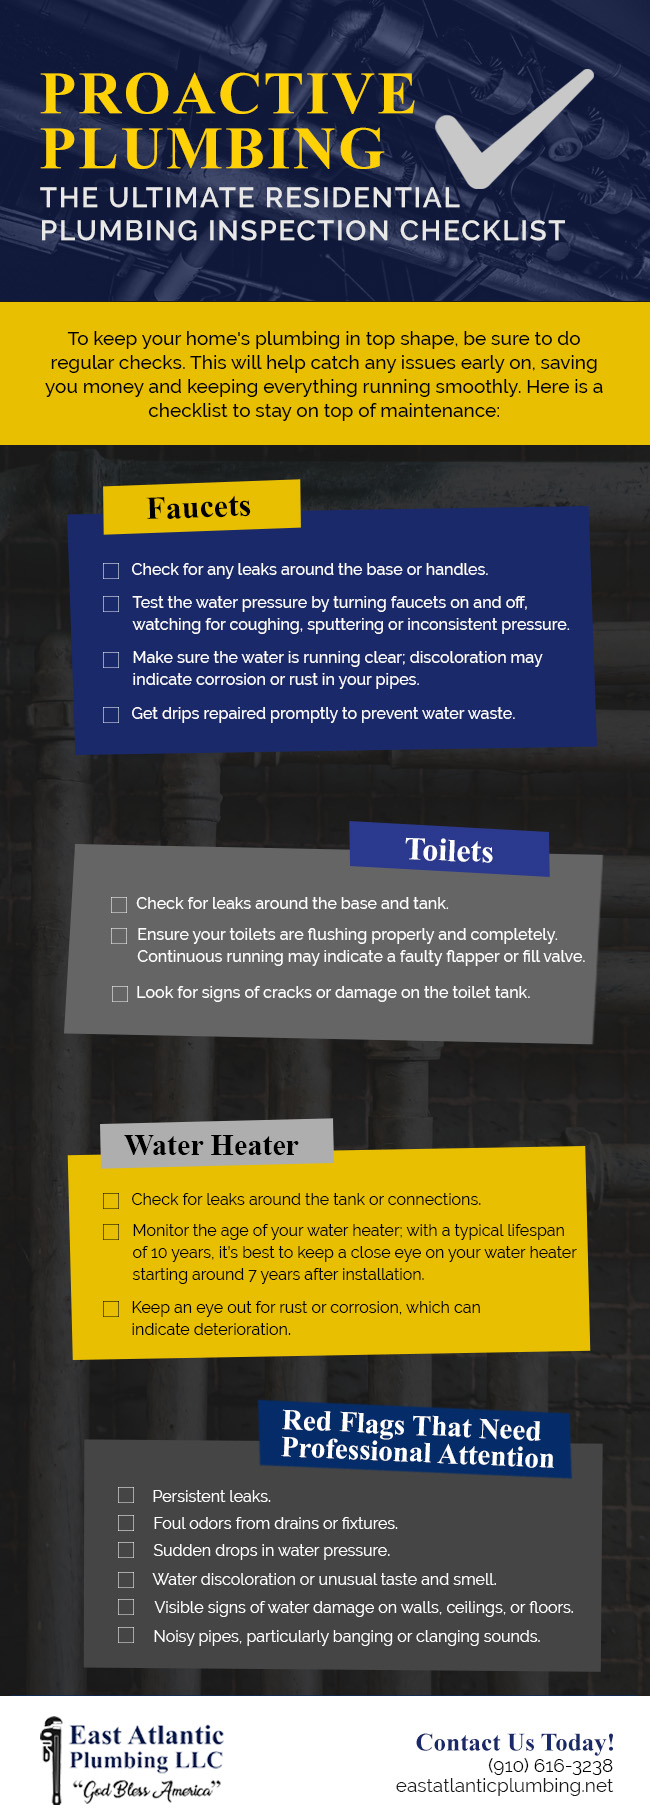 Proactive Plumbing: The Ultimate Residential Plumbing Inspection Checklist